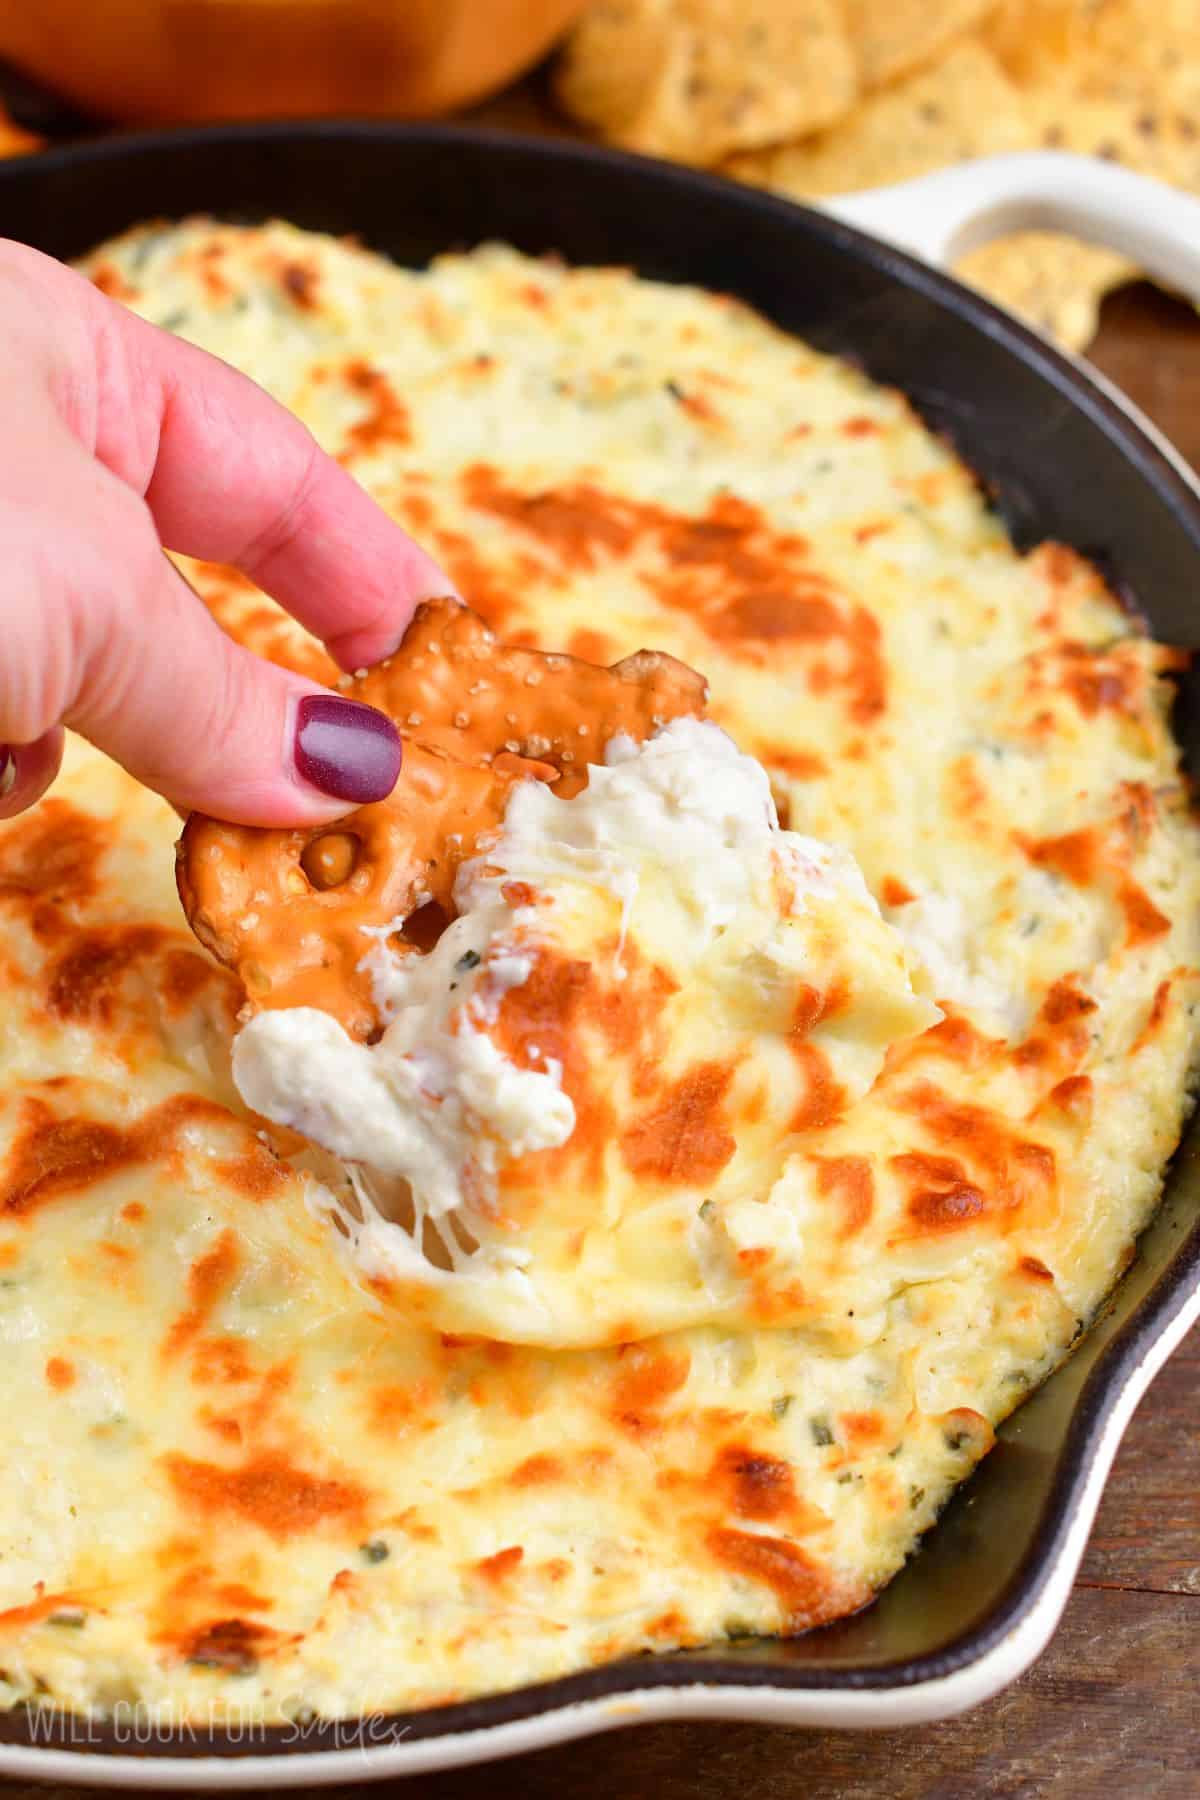 dipping into the warm chicken ranch dip with a pretzel chip.